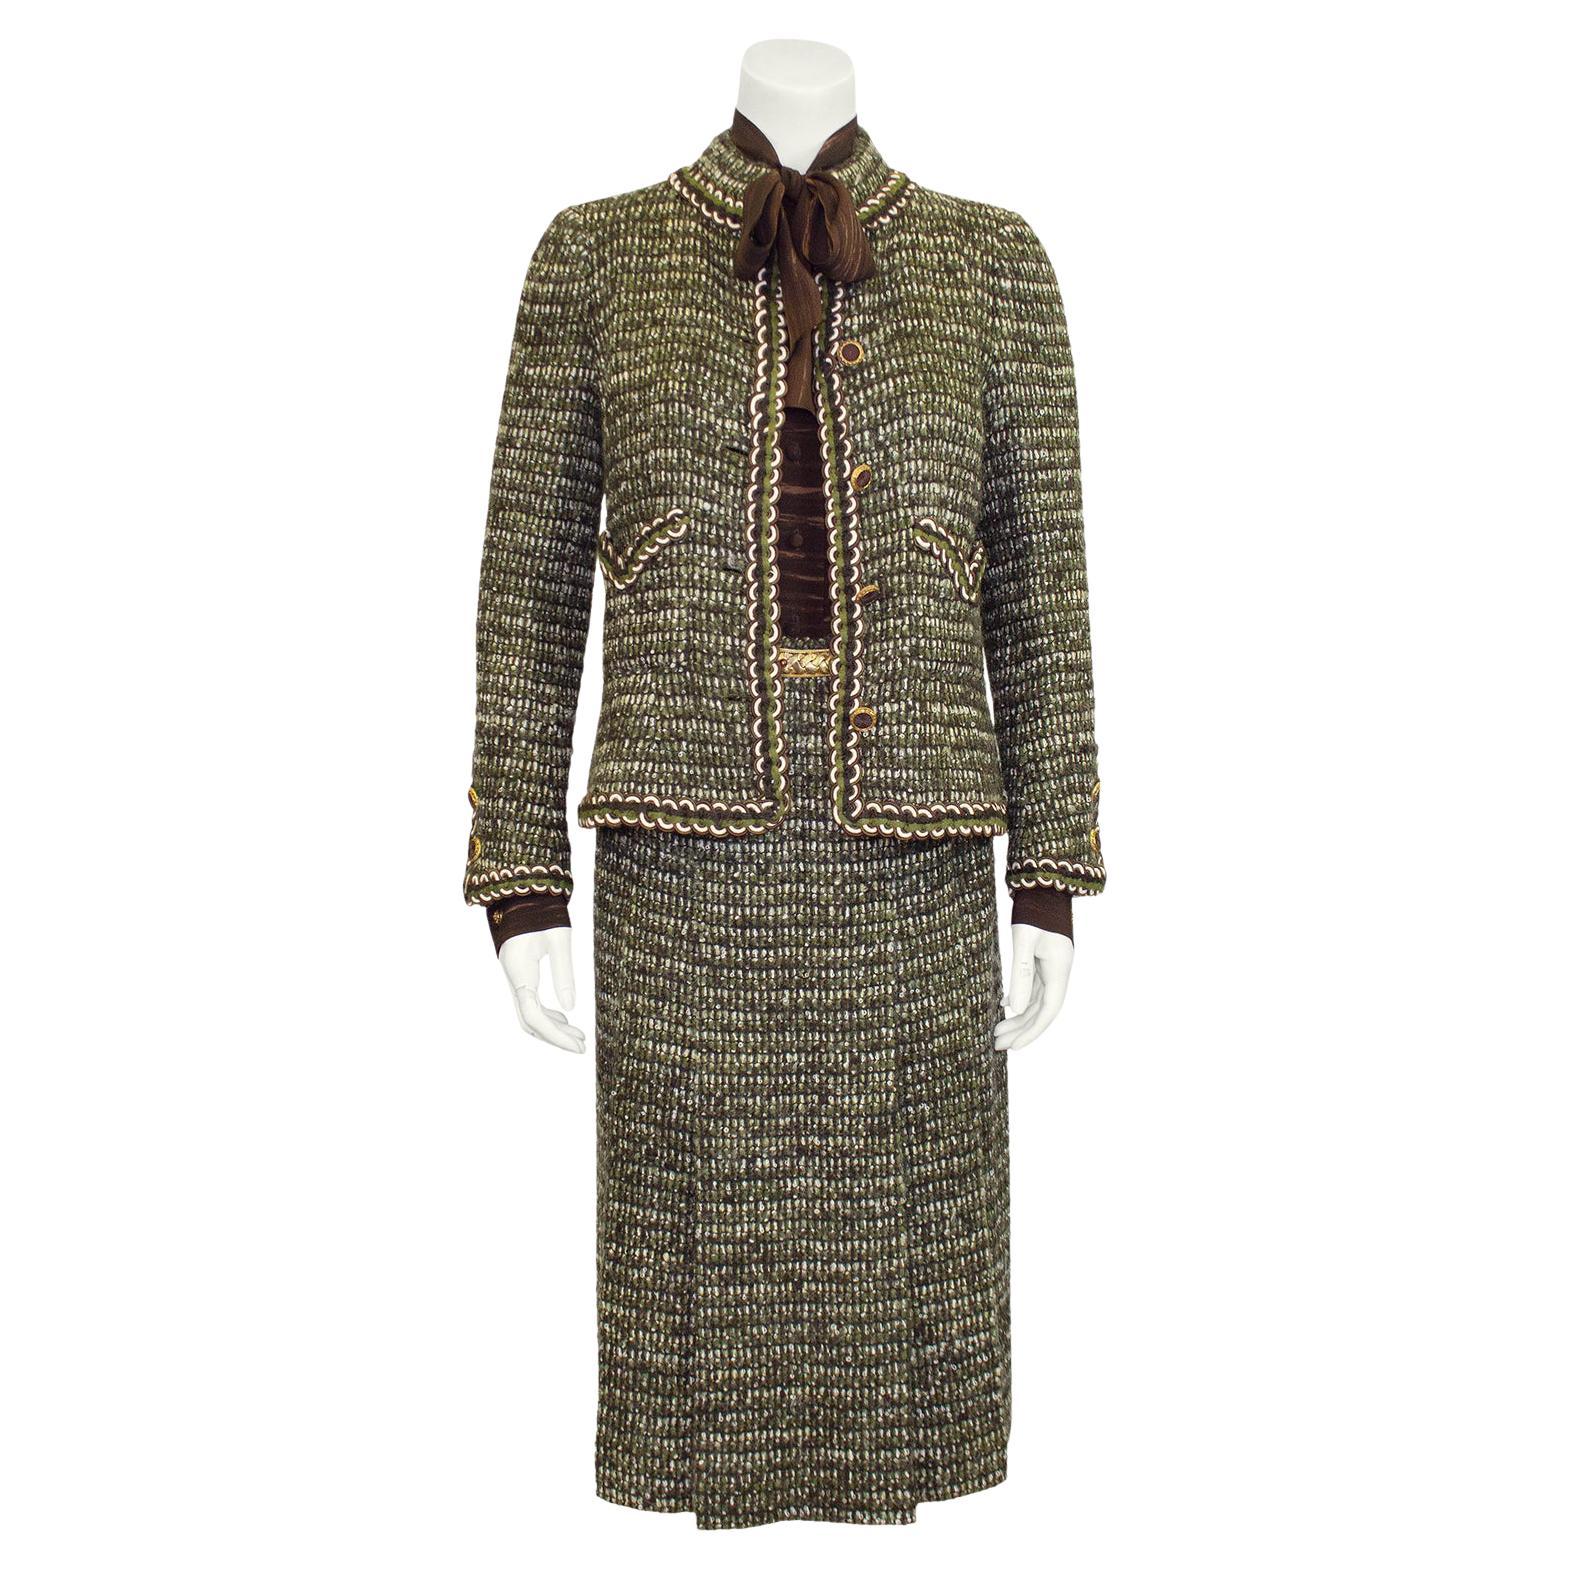 Show stopping 1981 green and brown Chanel Couture six piece ensemble including a jacket, blouse, skirt, scarf, brooch and belt. Mandarin collar jacket with green, brown and cream passimenterie trim. Carved gold buttons with brown centres. Patch